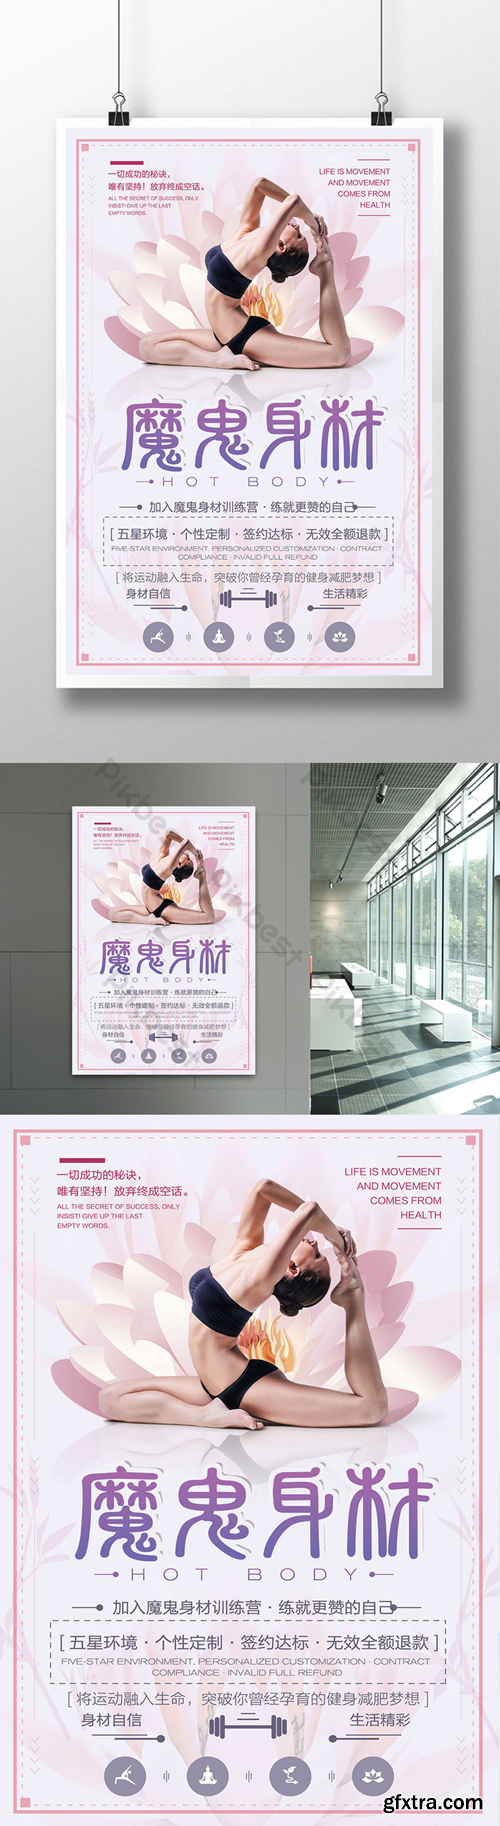 Simple Creative Fitness Club Sports Poster Design Template PSD